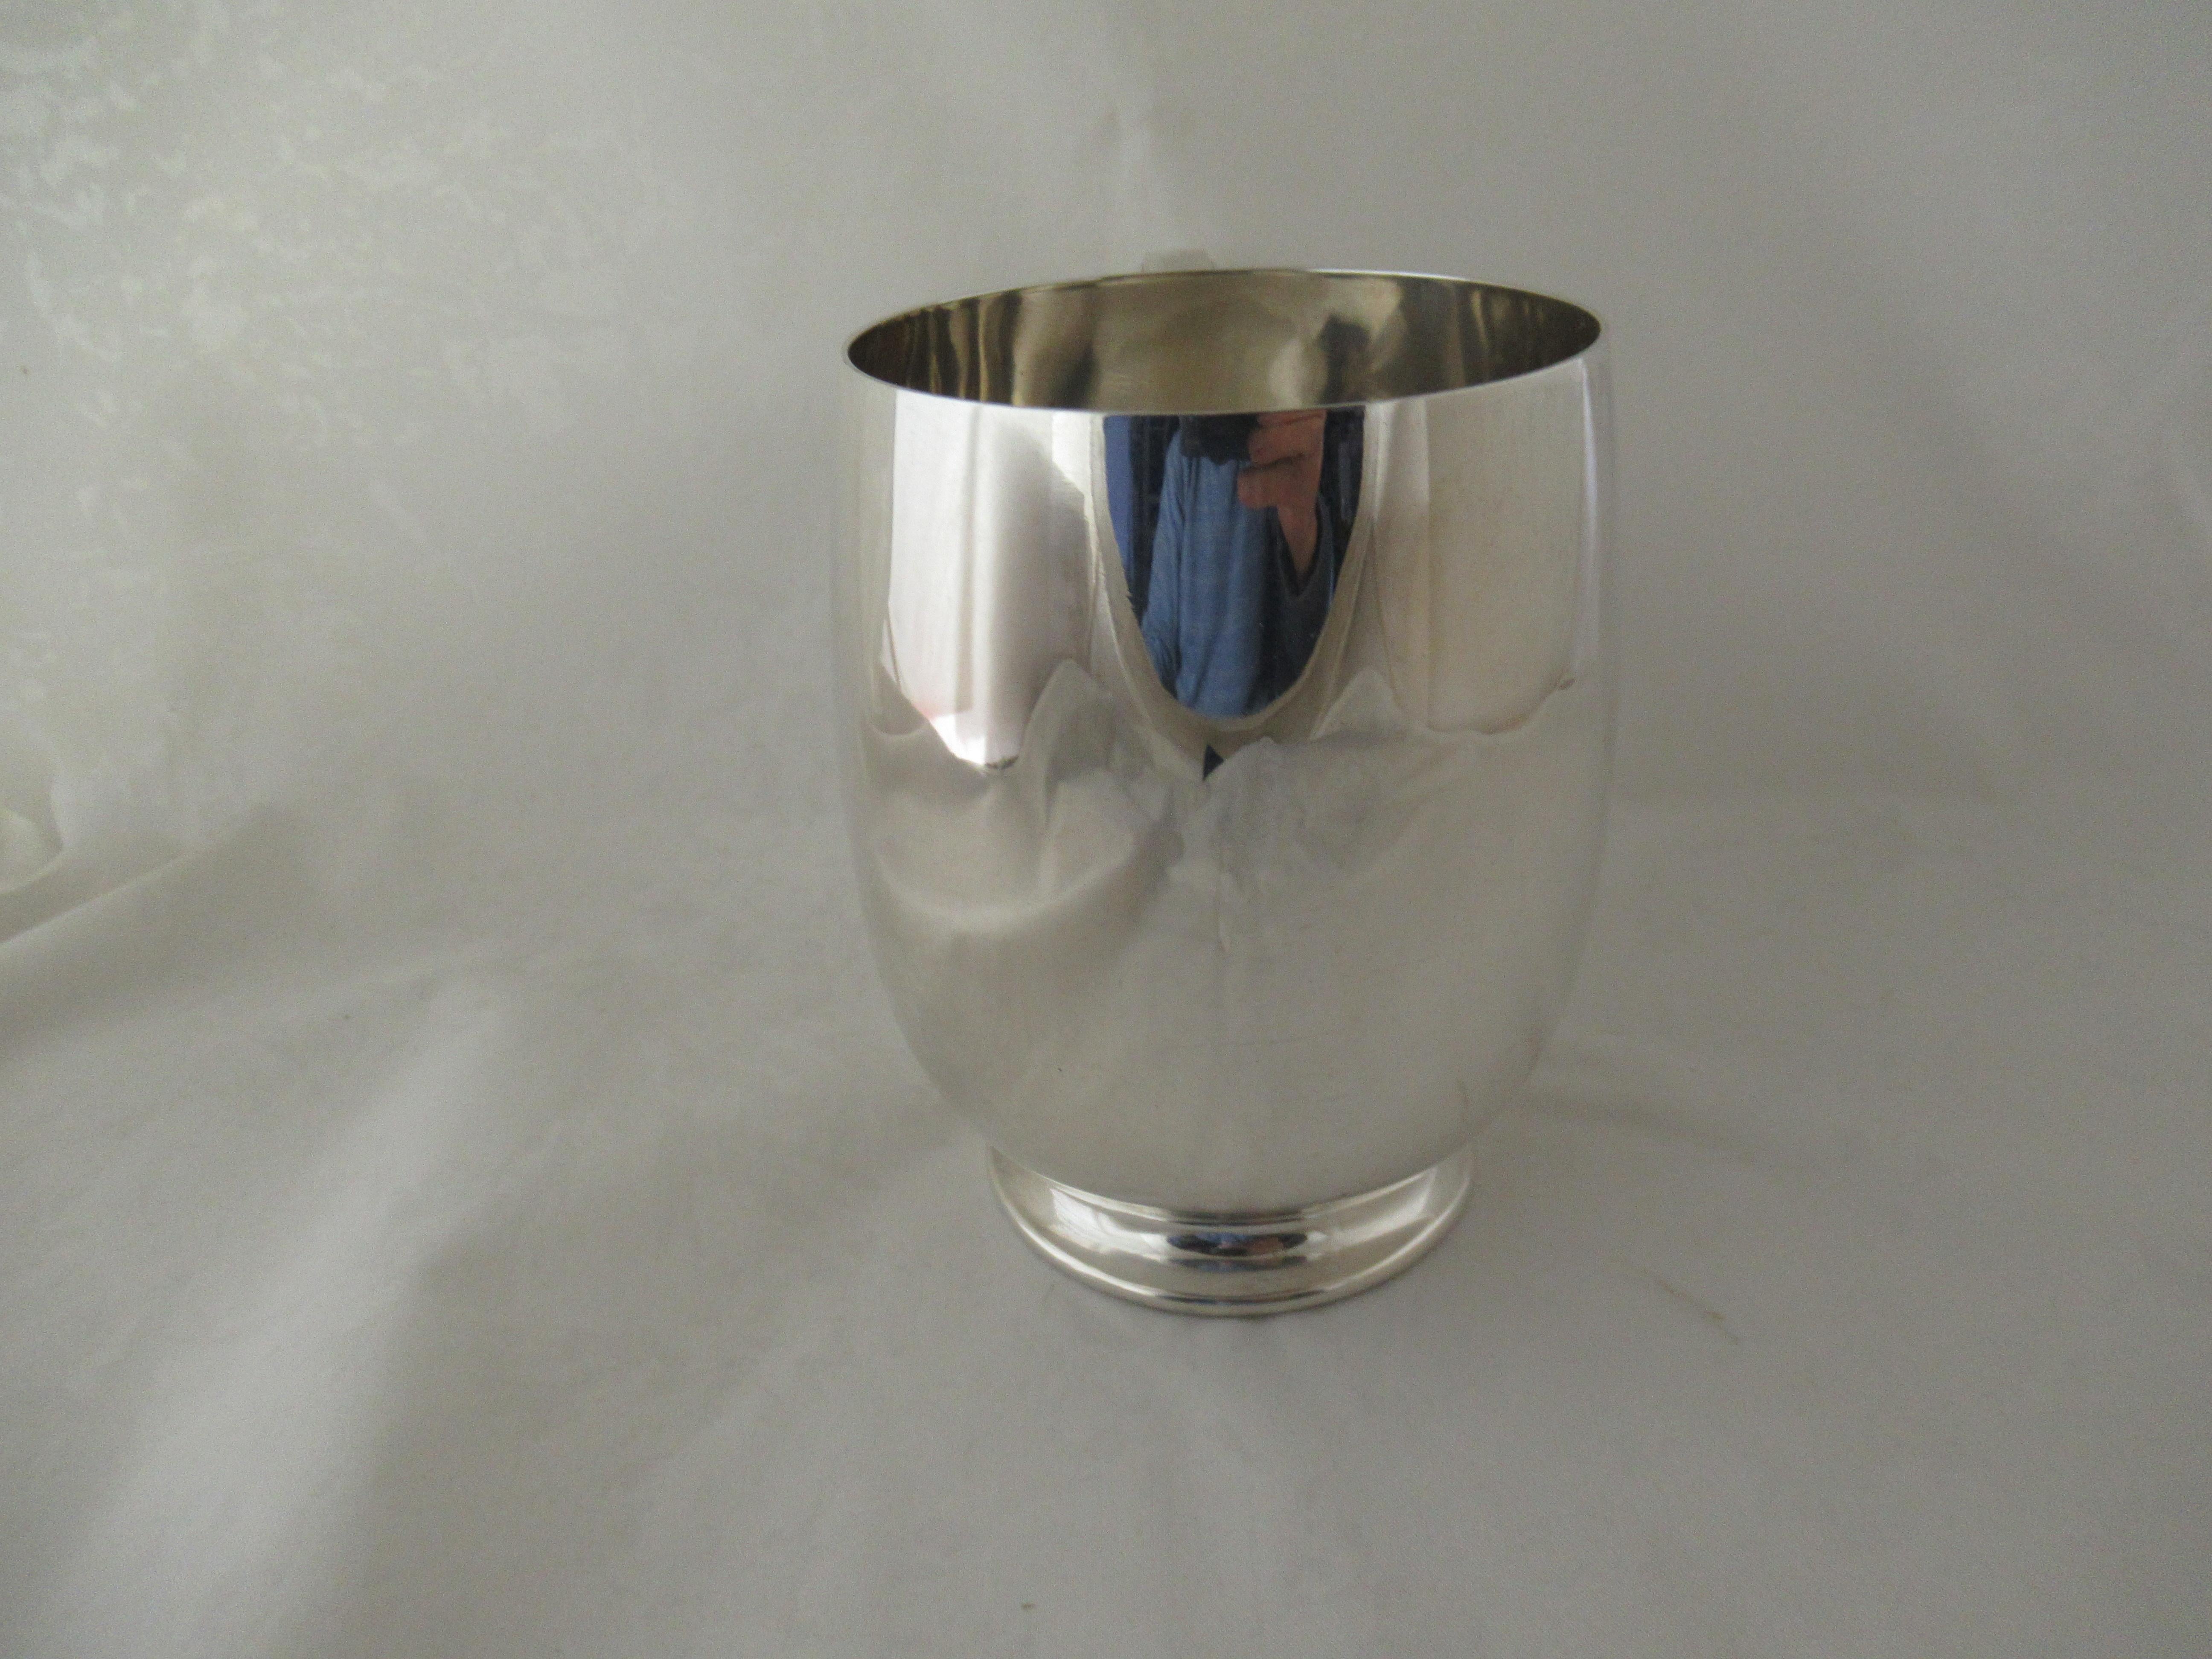 A superb, large, SOLID SILVER TANKARD.
Made in Birmingham, England in 1951  - 73 years old and in perfect condition. Must have been kept, wrapped up in a drawer, ever since it was made as there is not a single blemish to be seen.
Barrel shaped, with